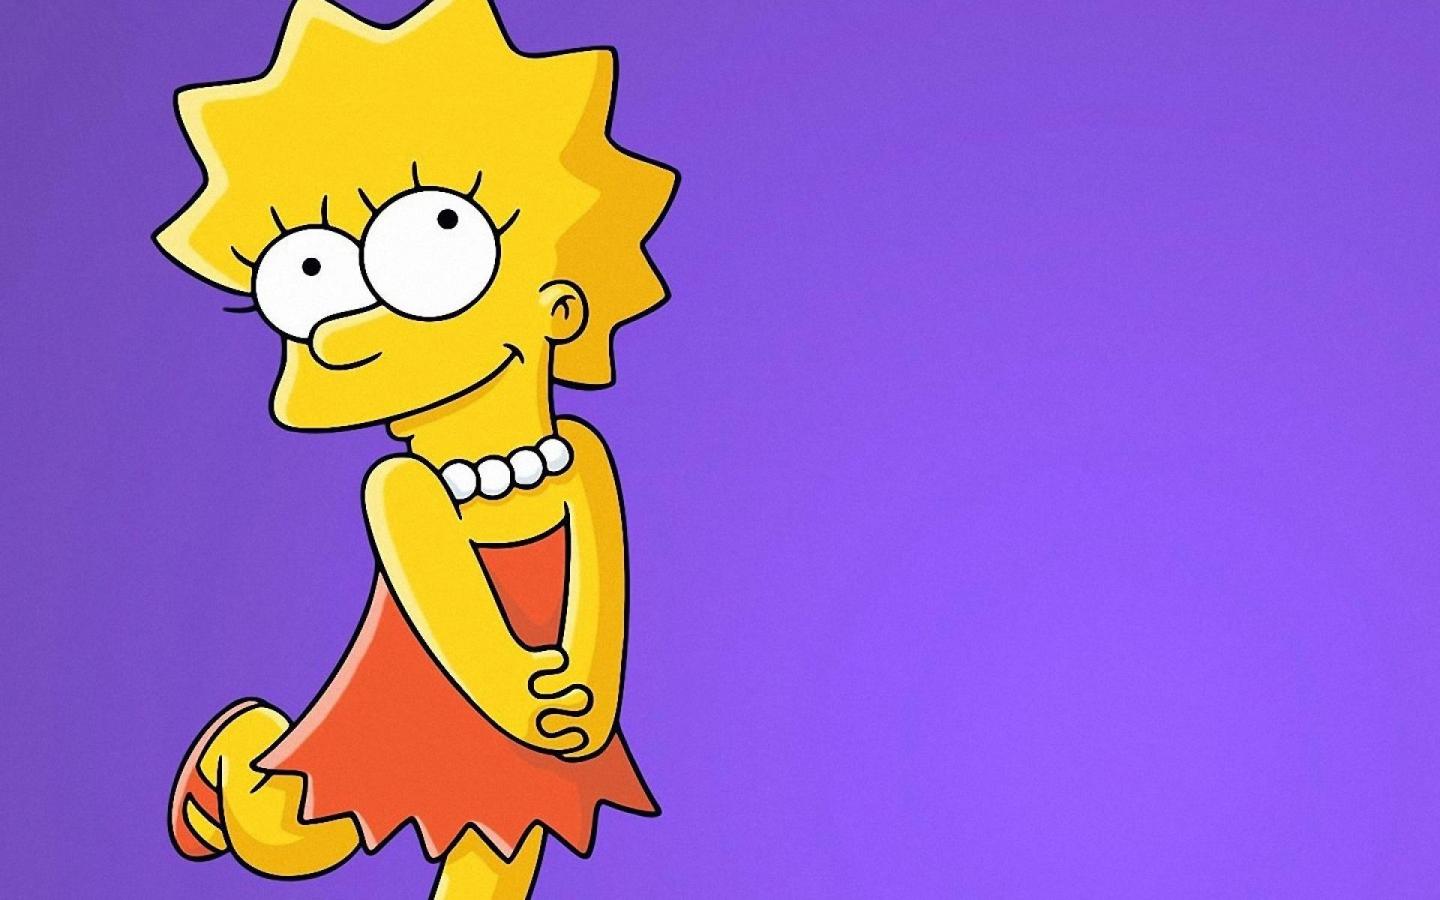 The Simpsons HD Wallpaper